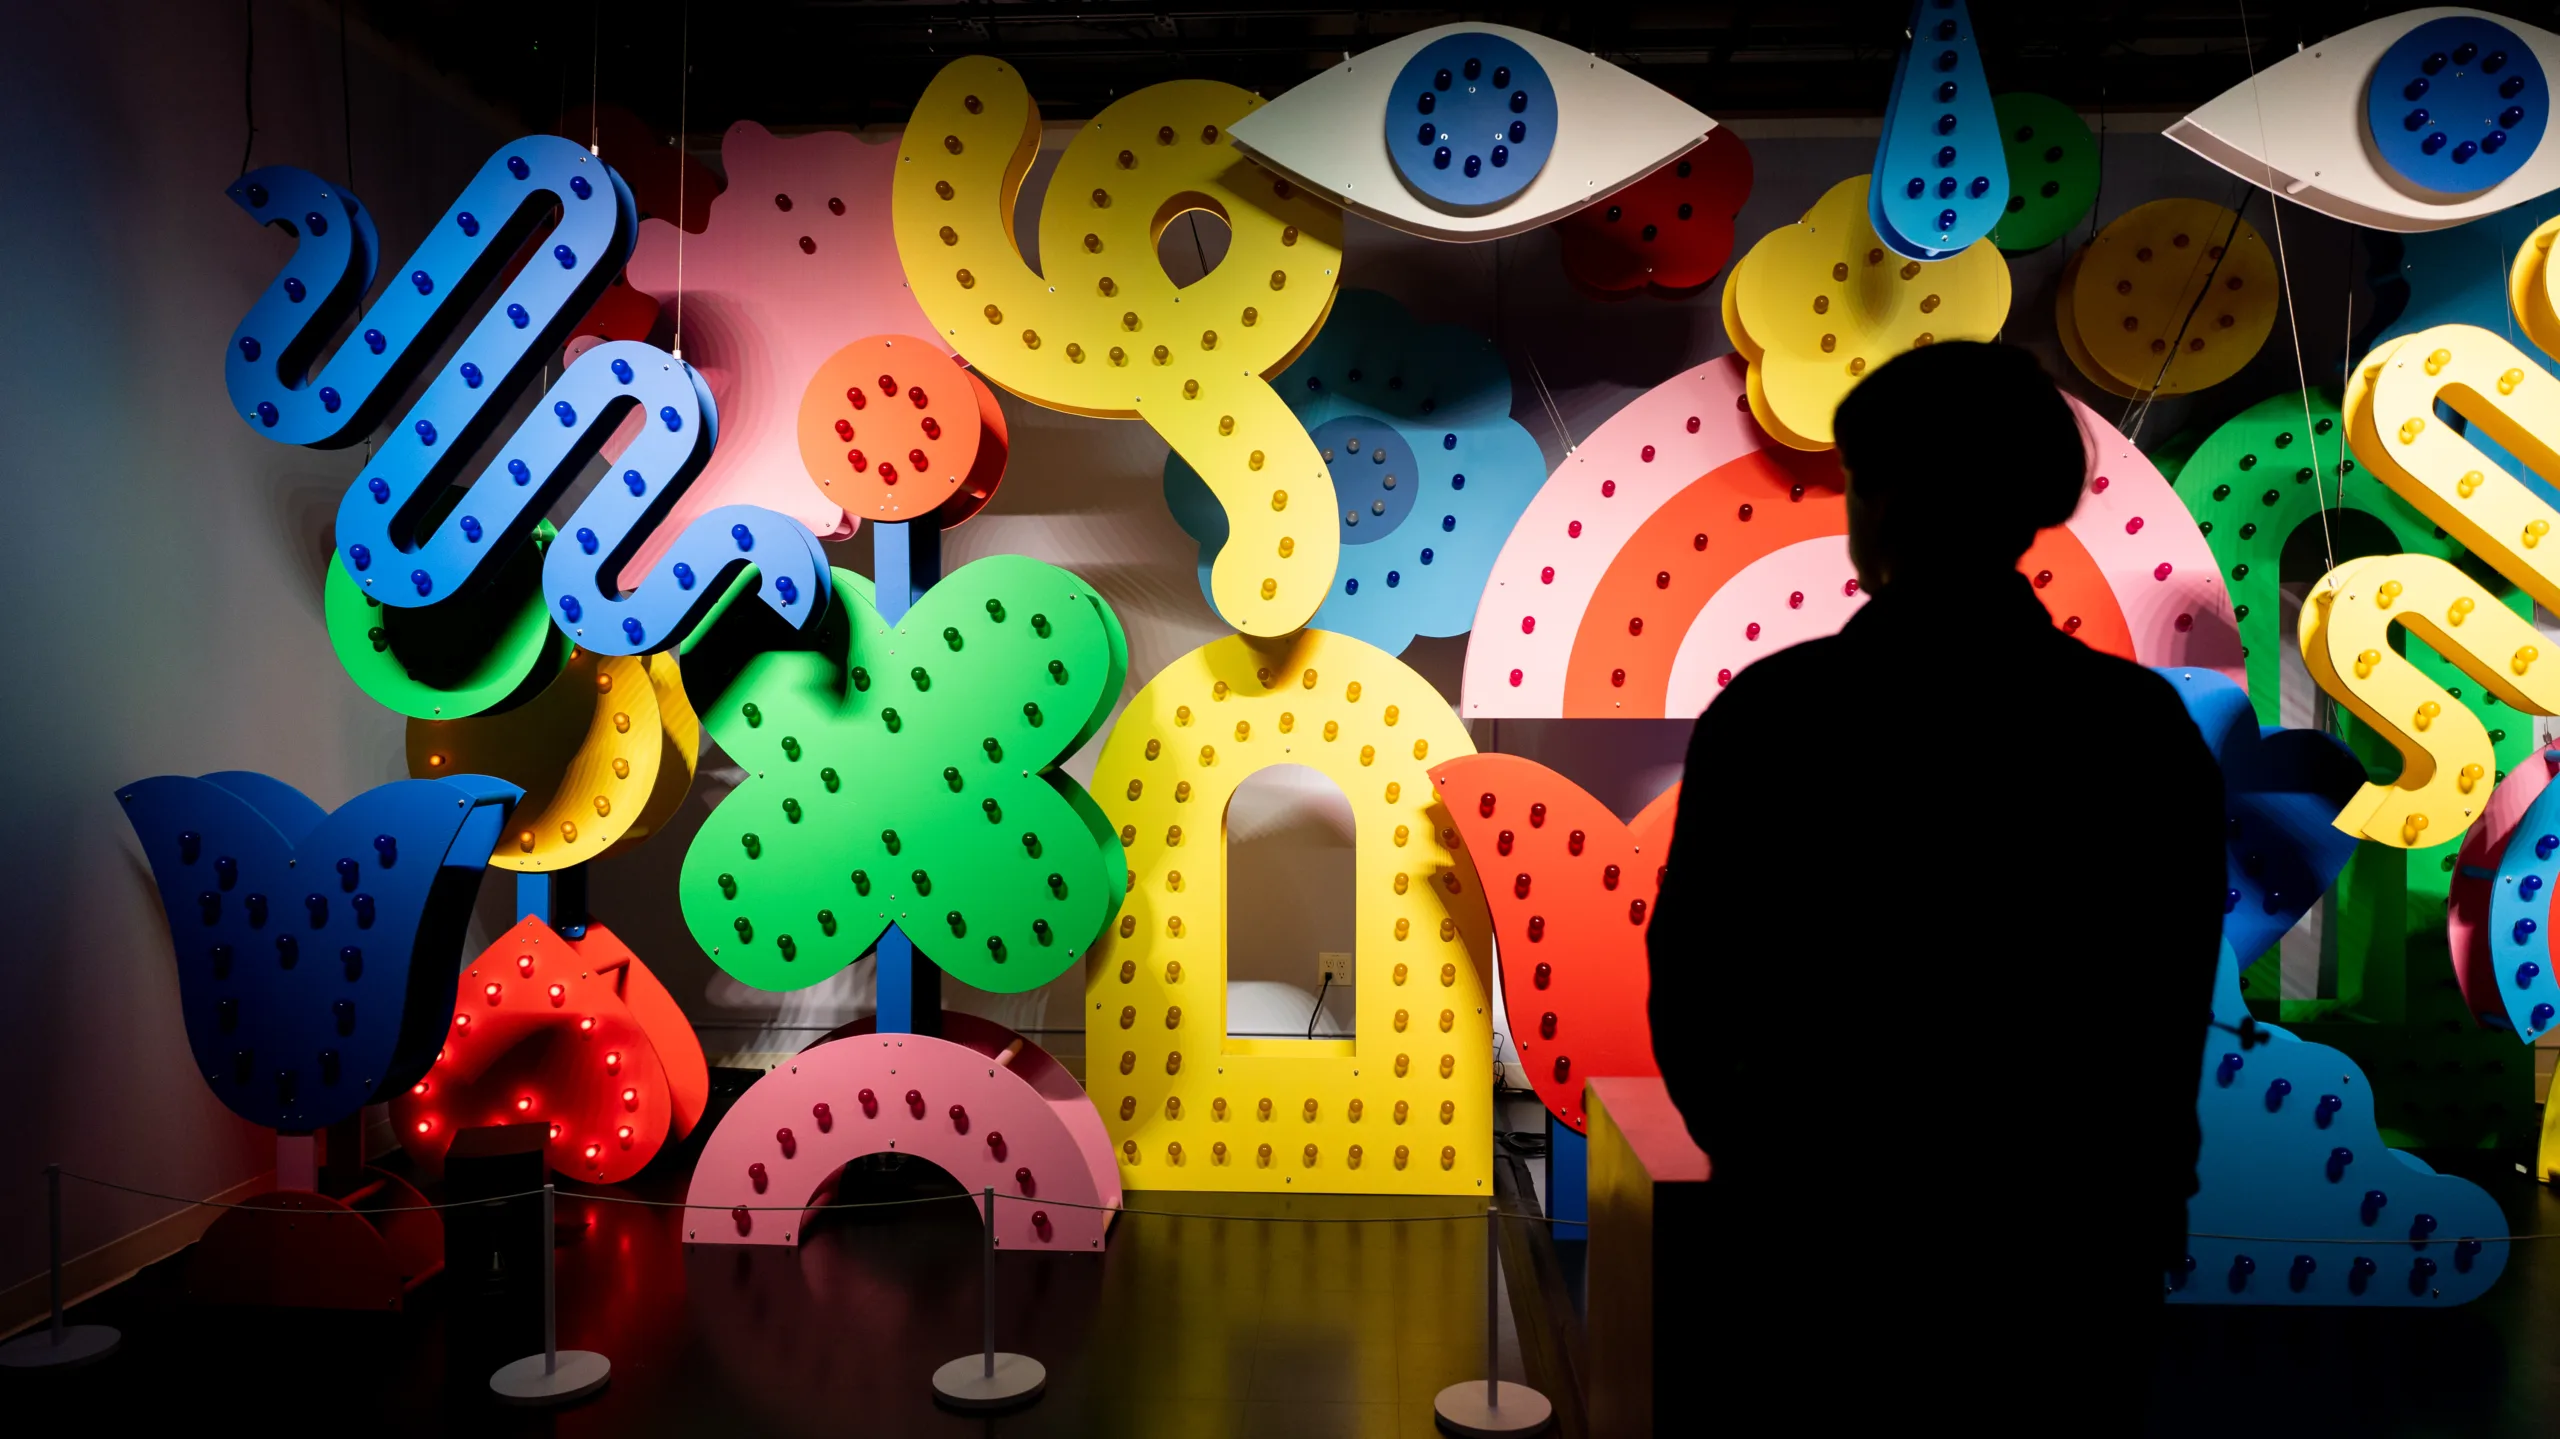 A person looks at a wall of light-up colorful shapes all in primary colors. It feels like a circus or Vegas.